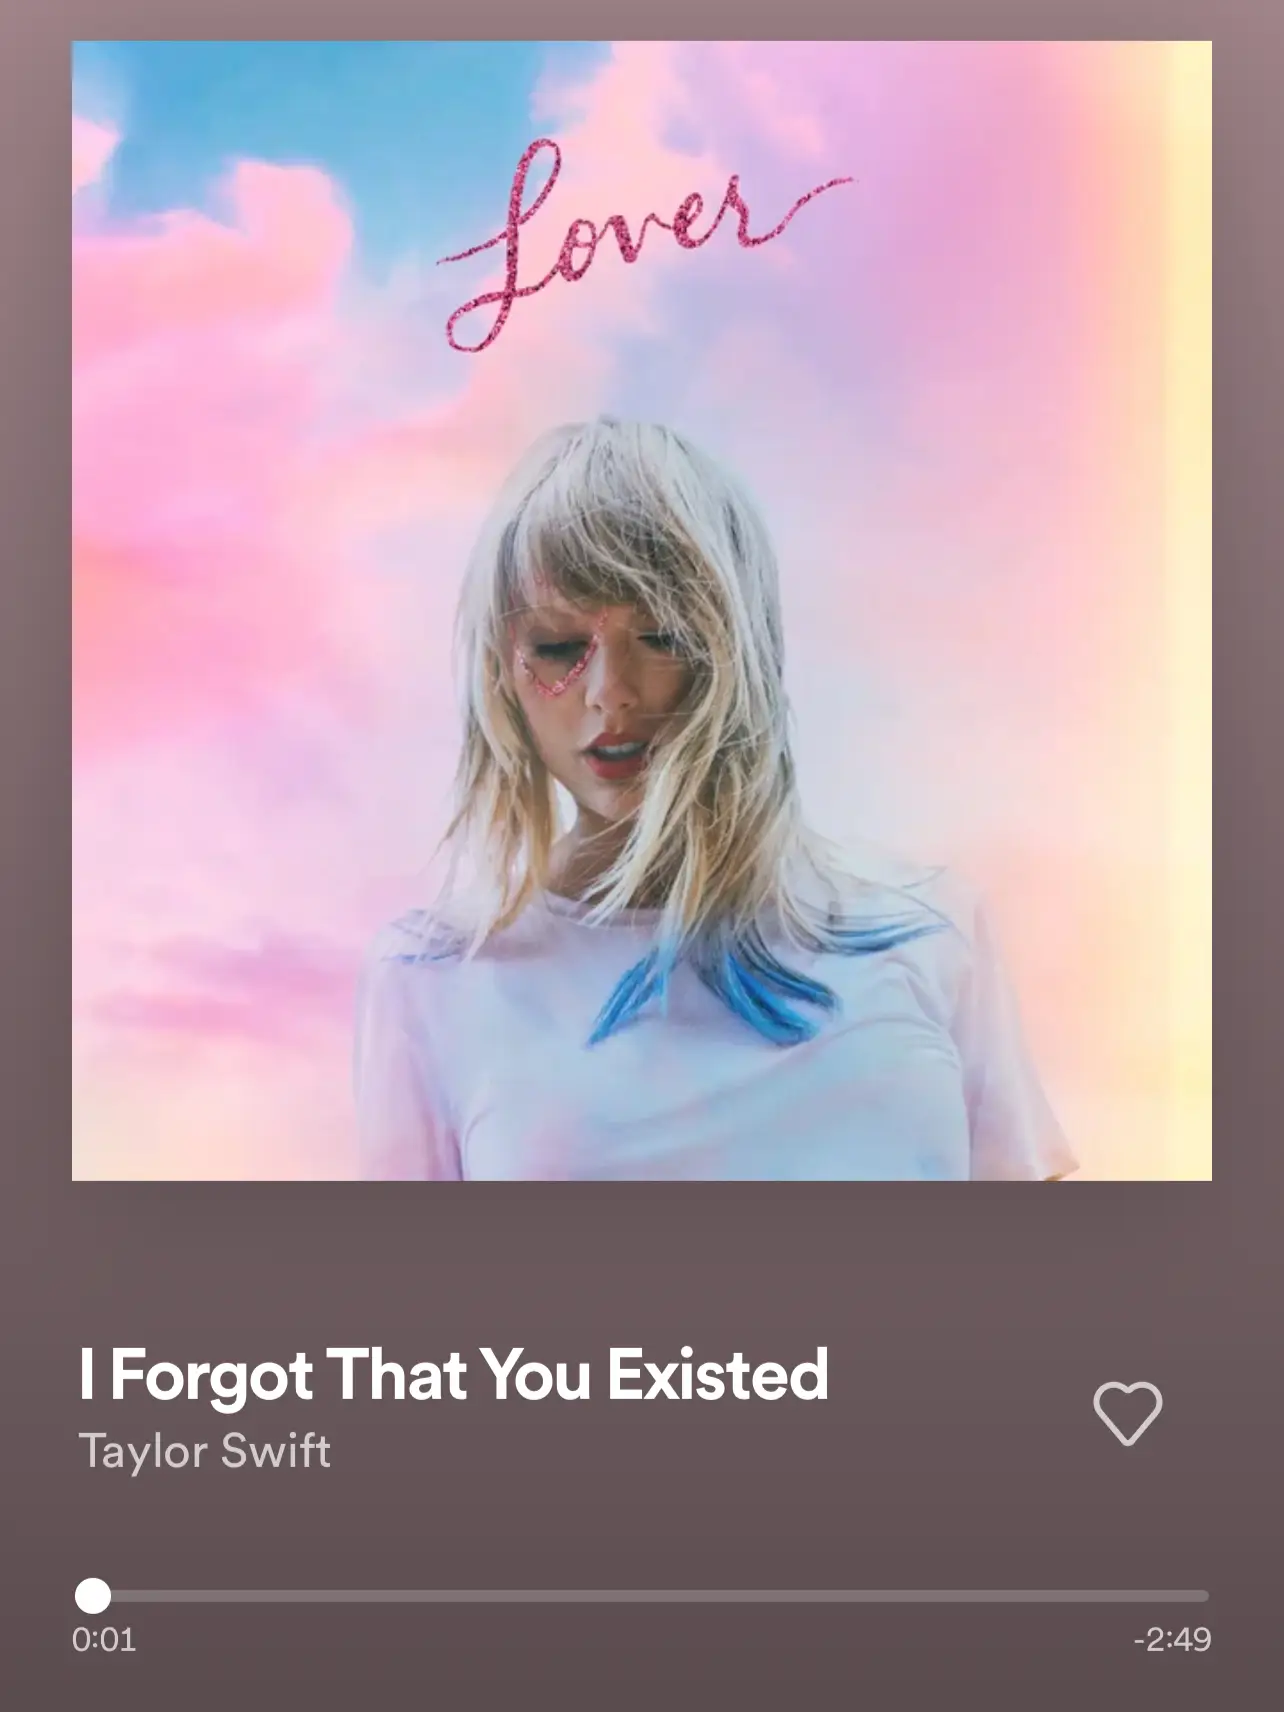 Who Is Taylor Swift's I Forgot That You Existed About